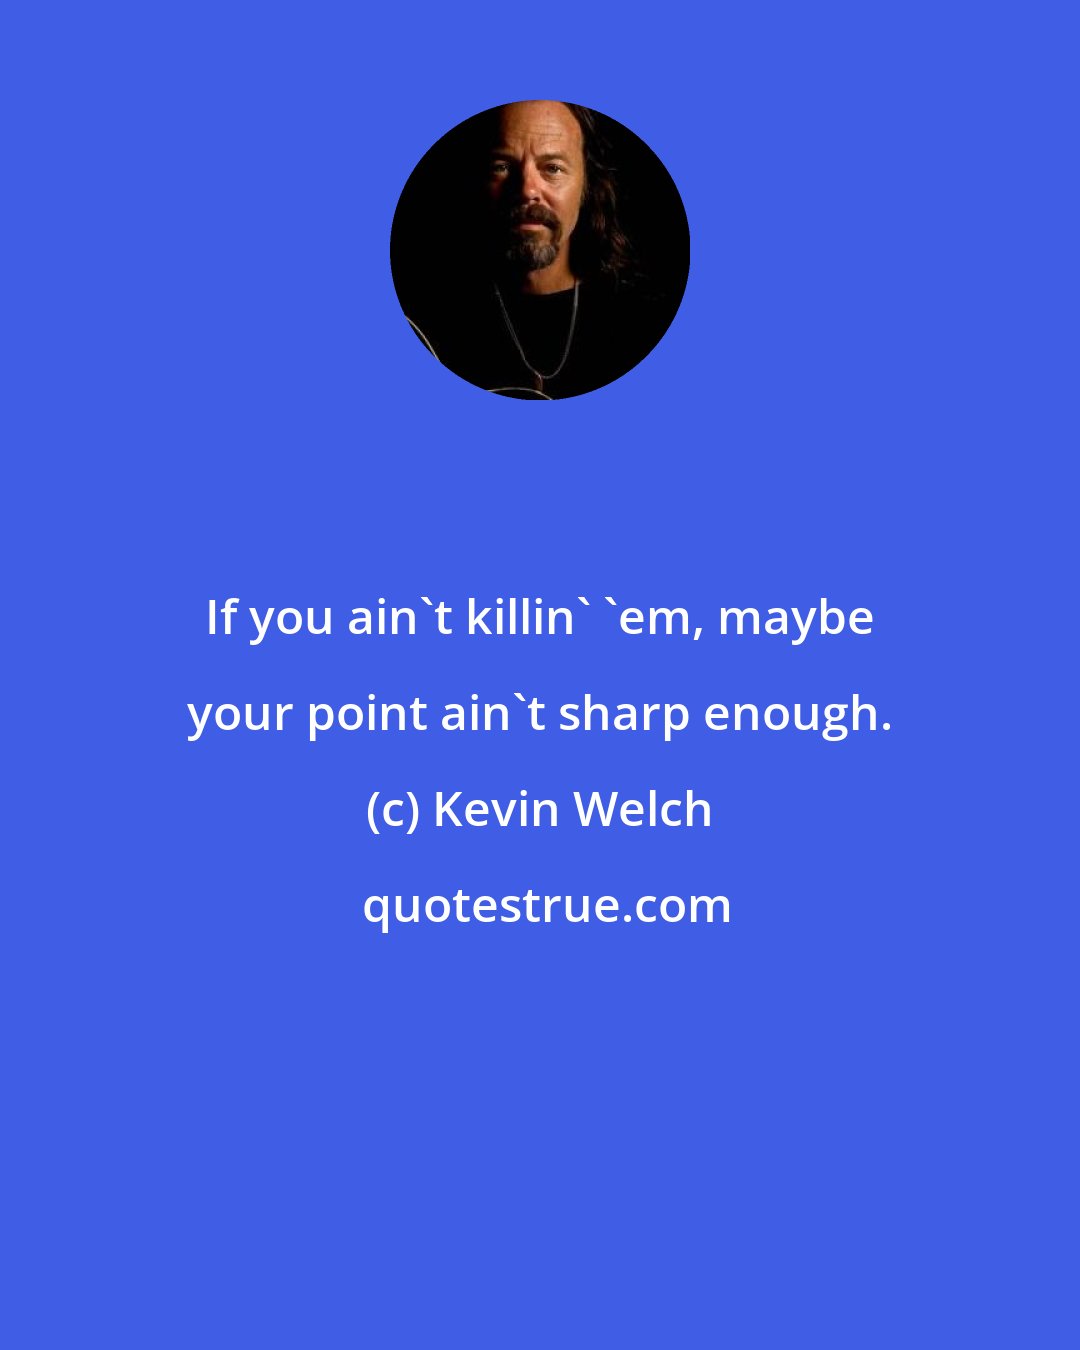 Kevin Welch: If you ain't killin' 'em, maybe your point ain't sharp enough.